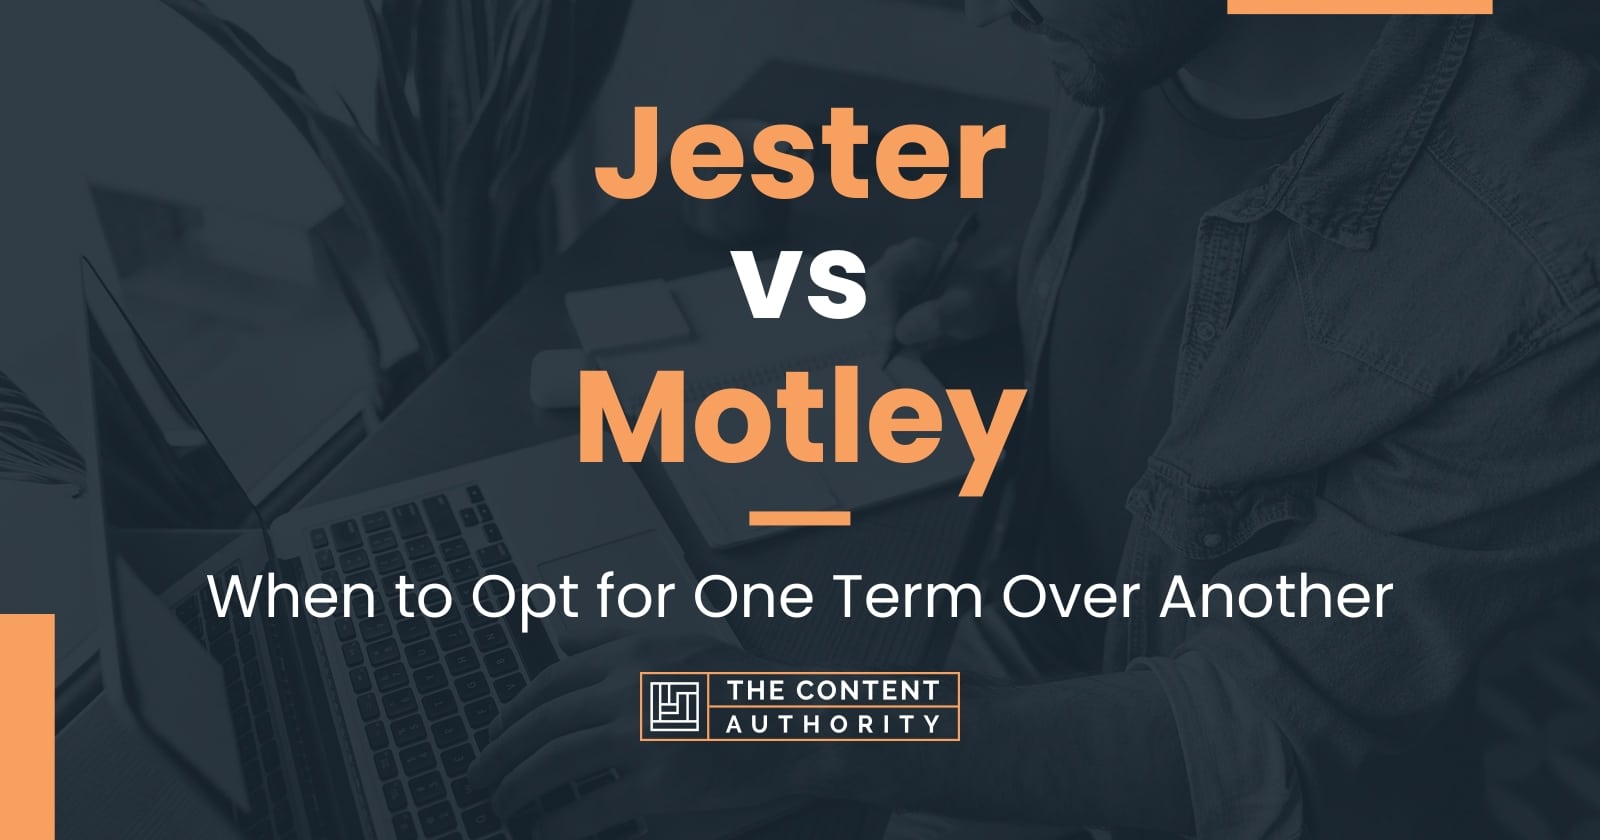 Jester vs Motley: When to Opt for One Term Over Another